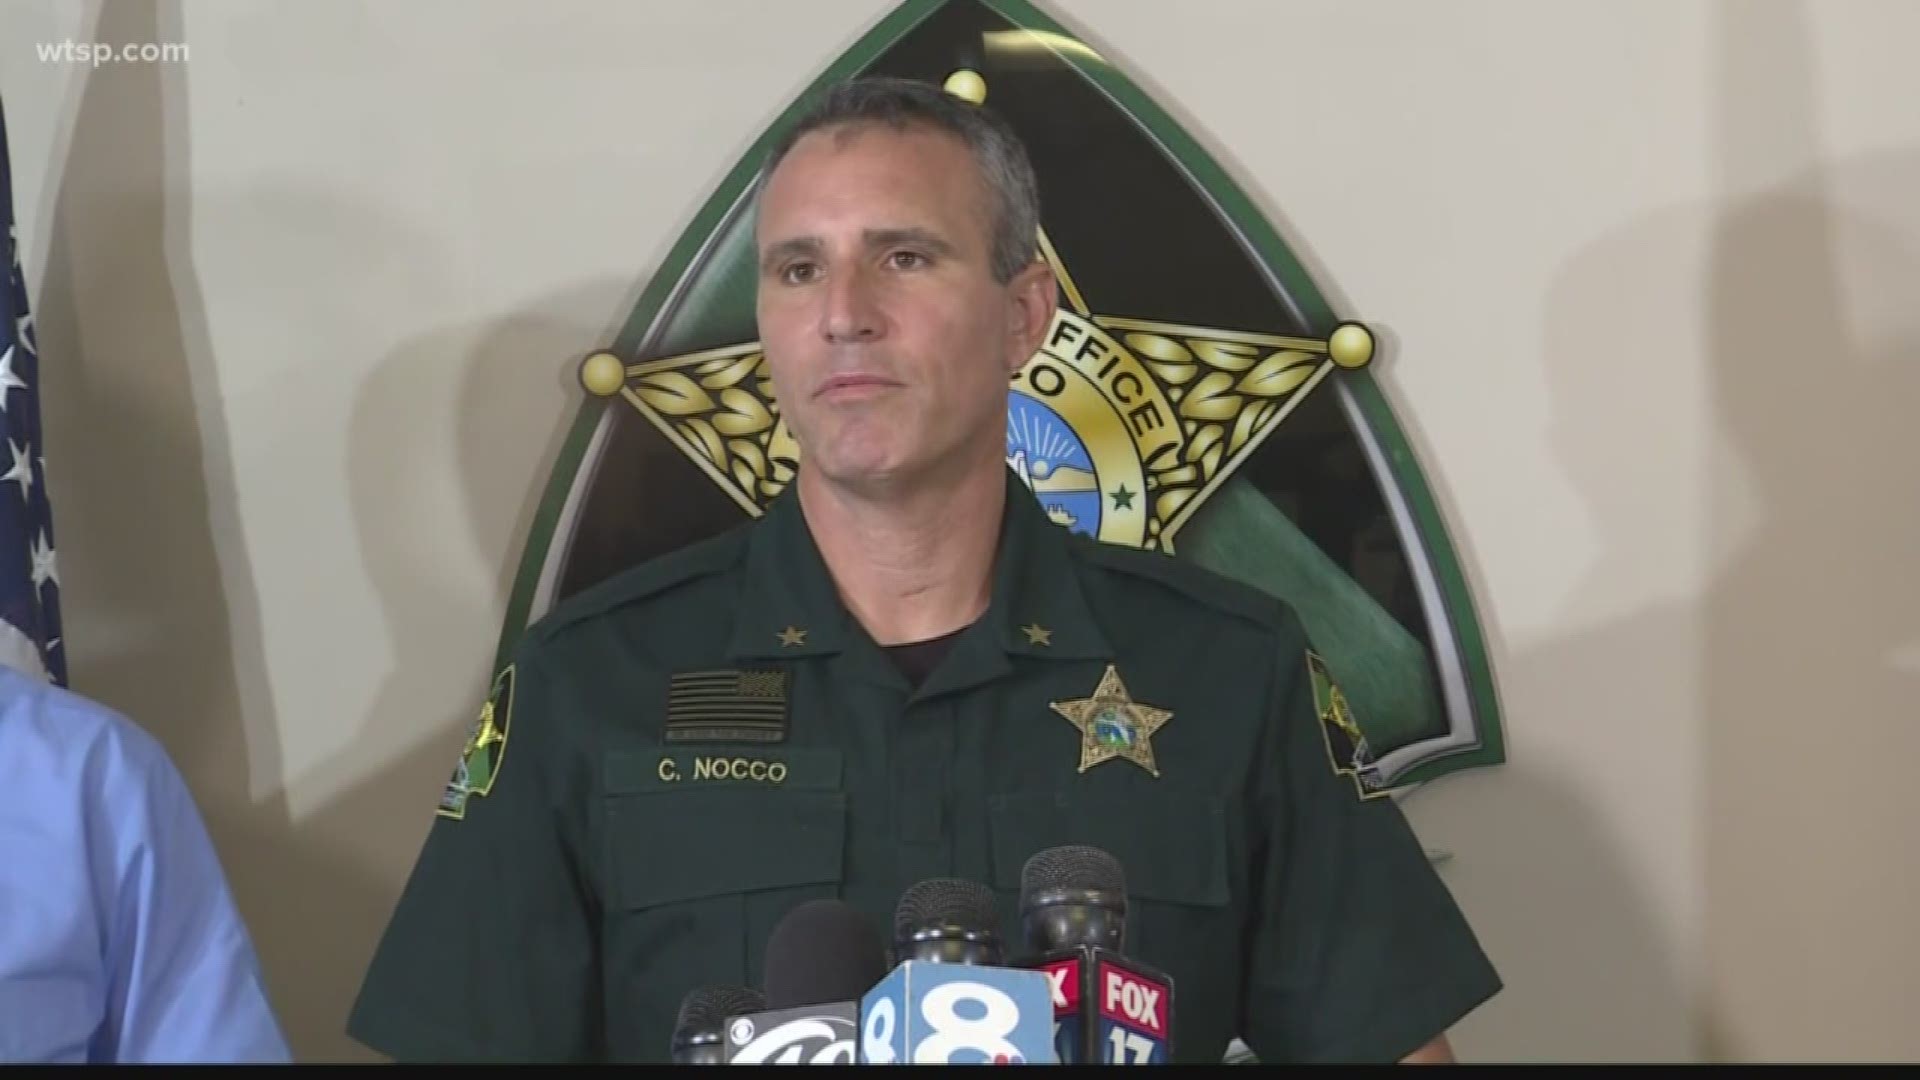 Pasco County Sheriff Chris Nocco is calling a neighbor a "hero" for ending an increasingly violent domestic situation.

Around 6:50 p.m. Wednesday, a man was having a violent argument with a second person, Nocco said. There were children in the house, and fearing for their lives, the second person started putting them through a second-story window to get them to safety. https://on.wtsp.com/2PohAkr